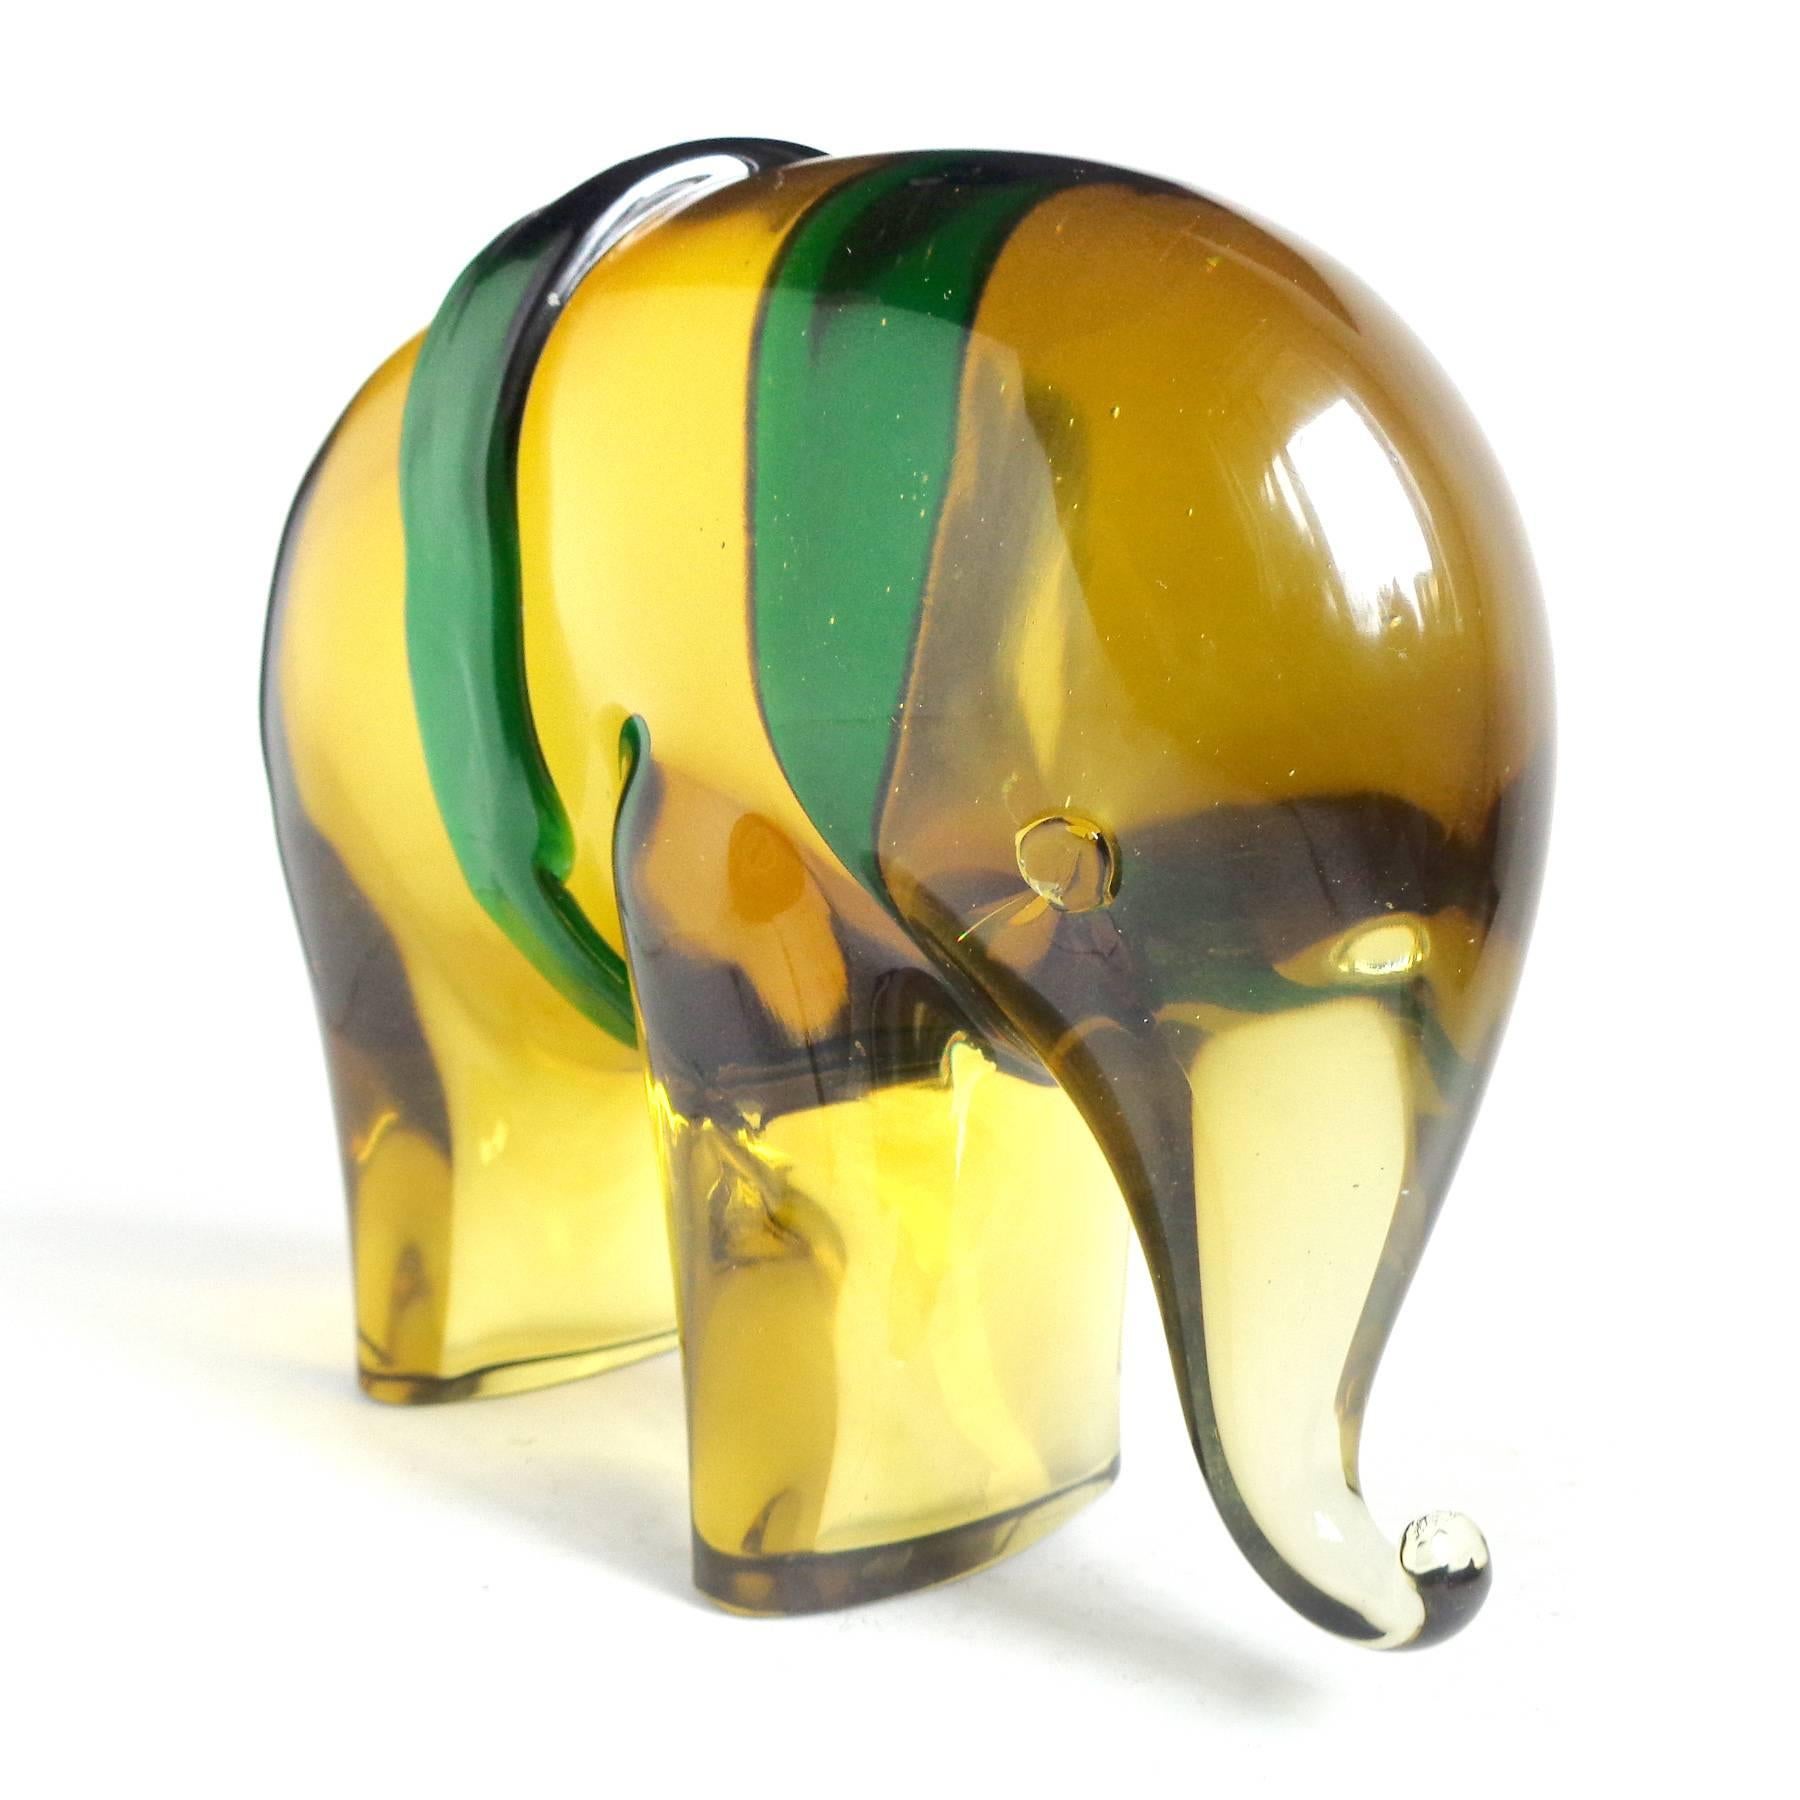 Free shipping worldwide! See details below description.

Elephant - Large Murano hand blown golden amber Sommerso art glass elephant sculpture. Documented to designer Luciano Gaspari for the Salviati company. The cute (and very heavy) elephant has